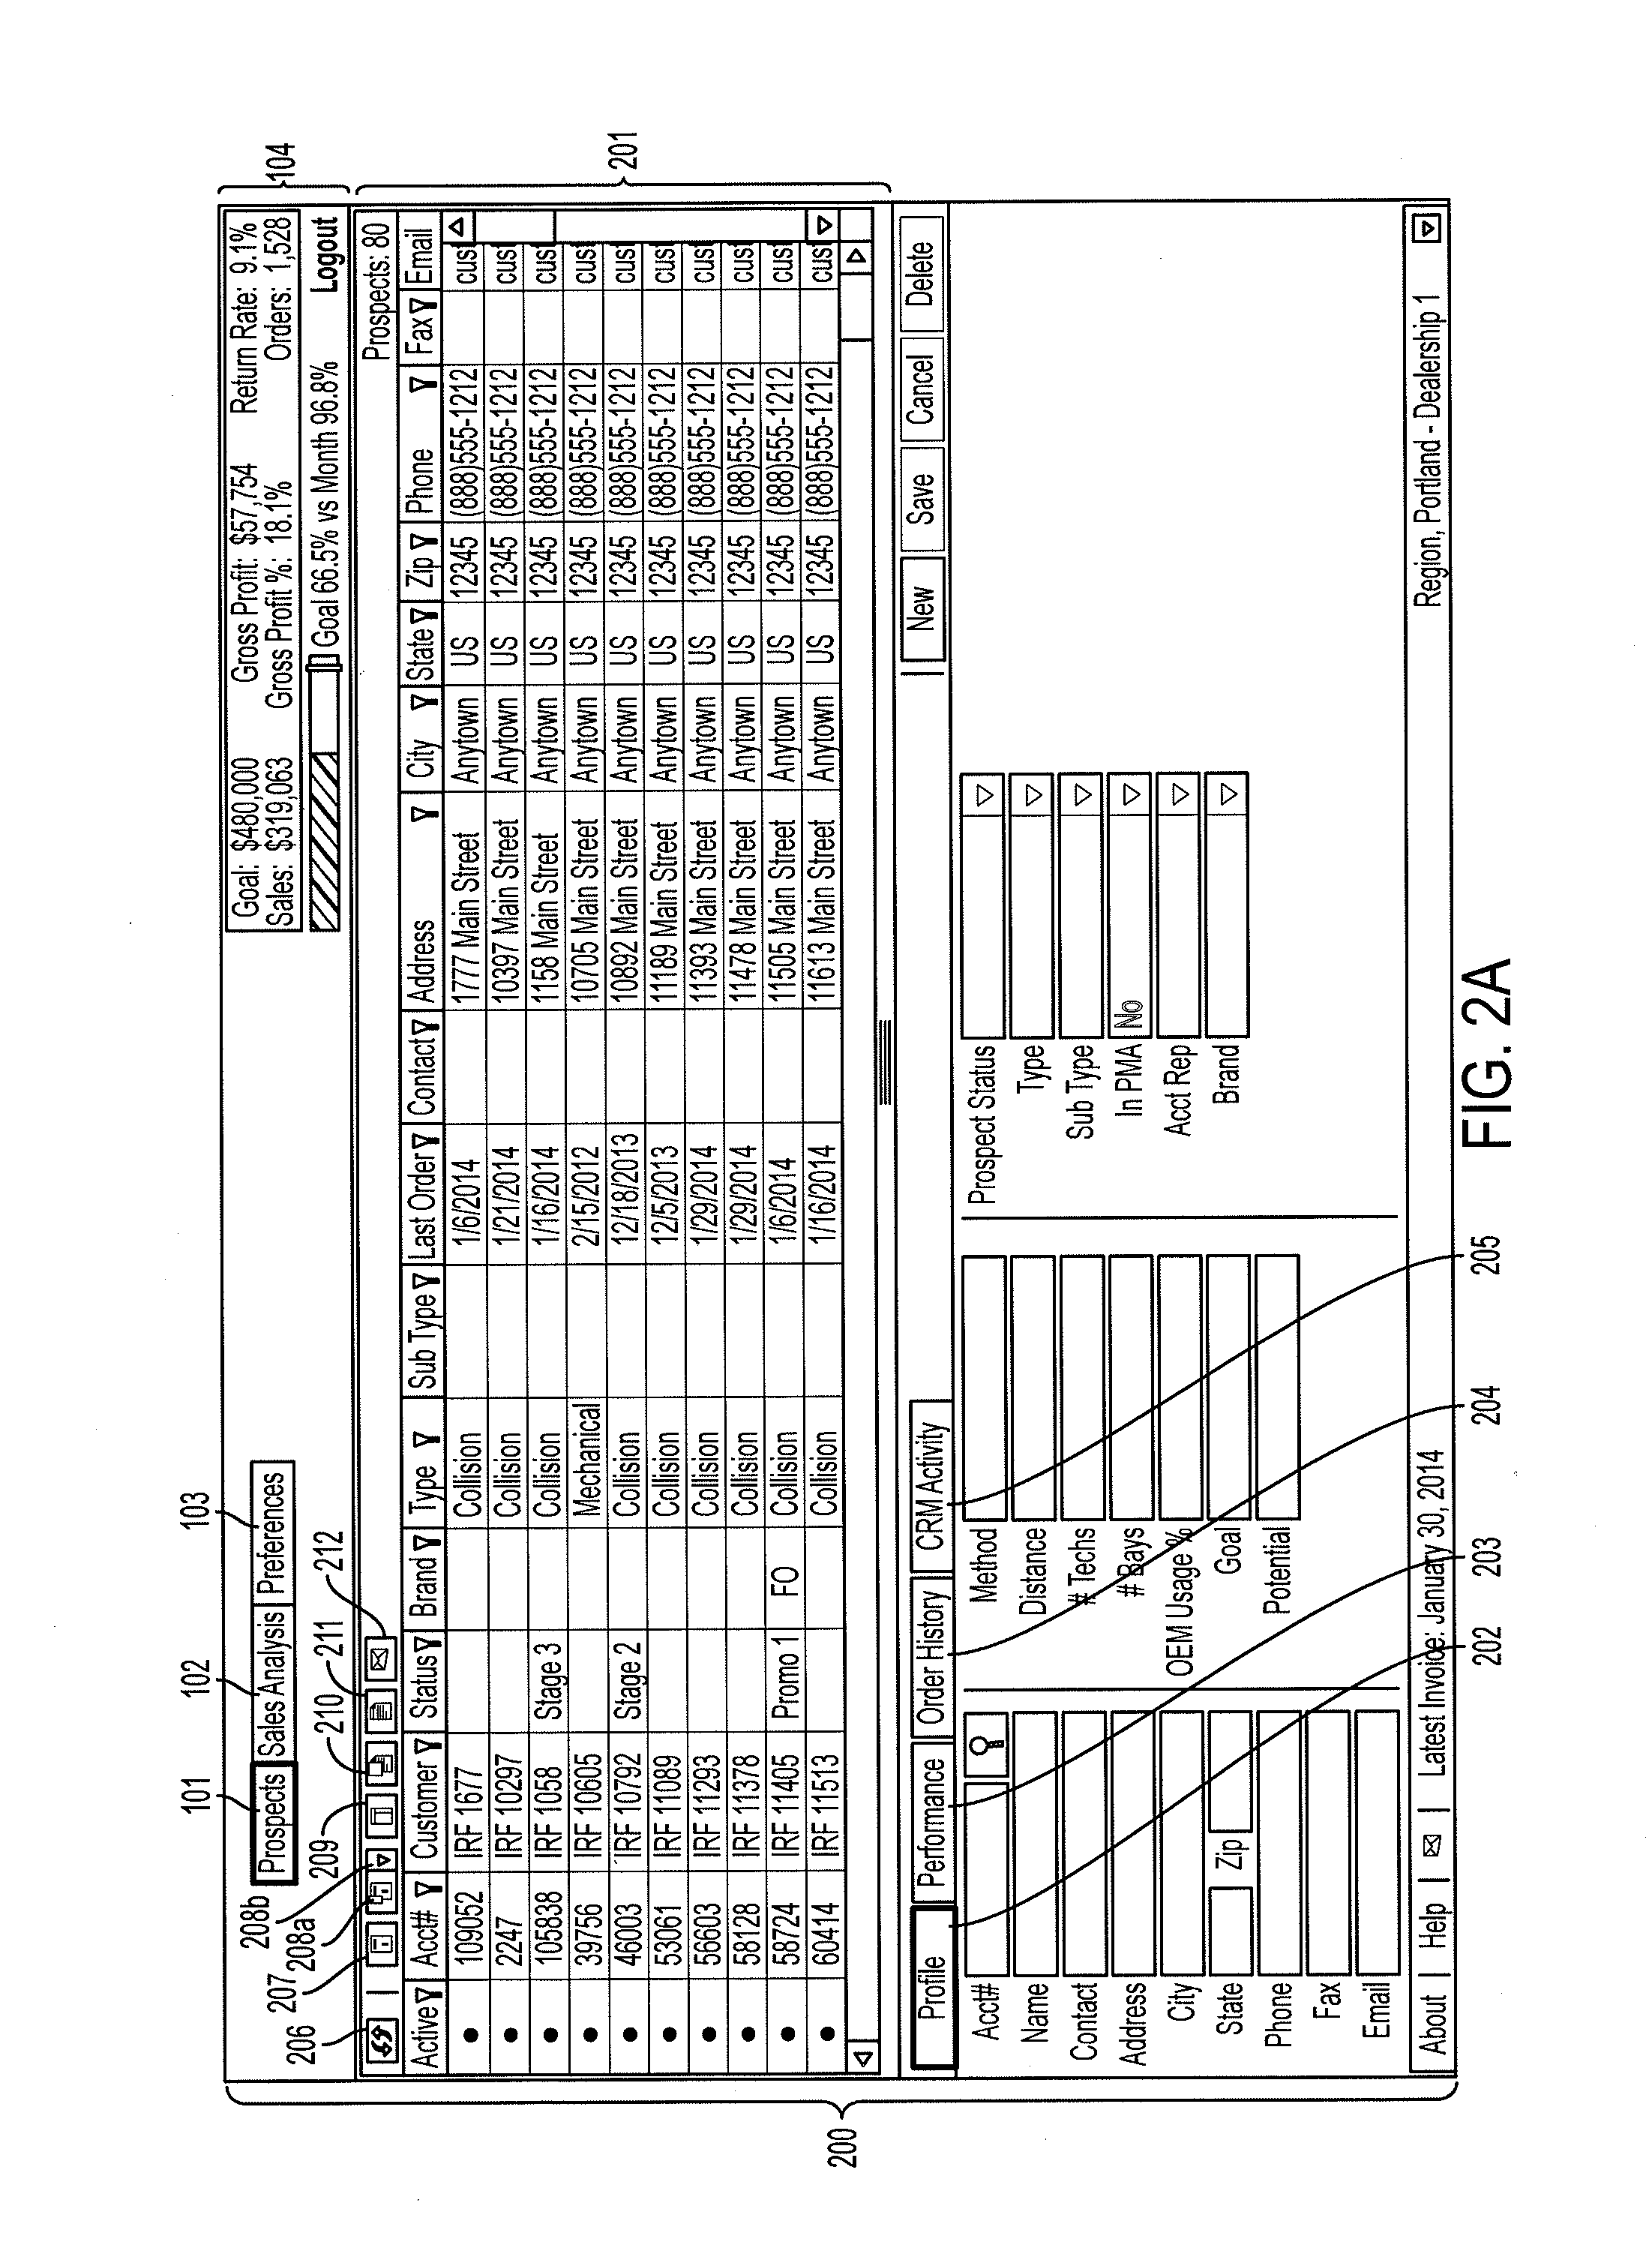 Methods for tracking and analyzing automotive parts transaction data, and automatically generating and sending at a pre-determined frequency comprehensive reports thereof